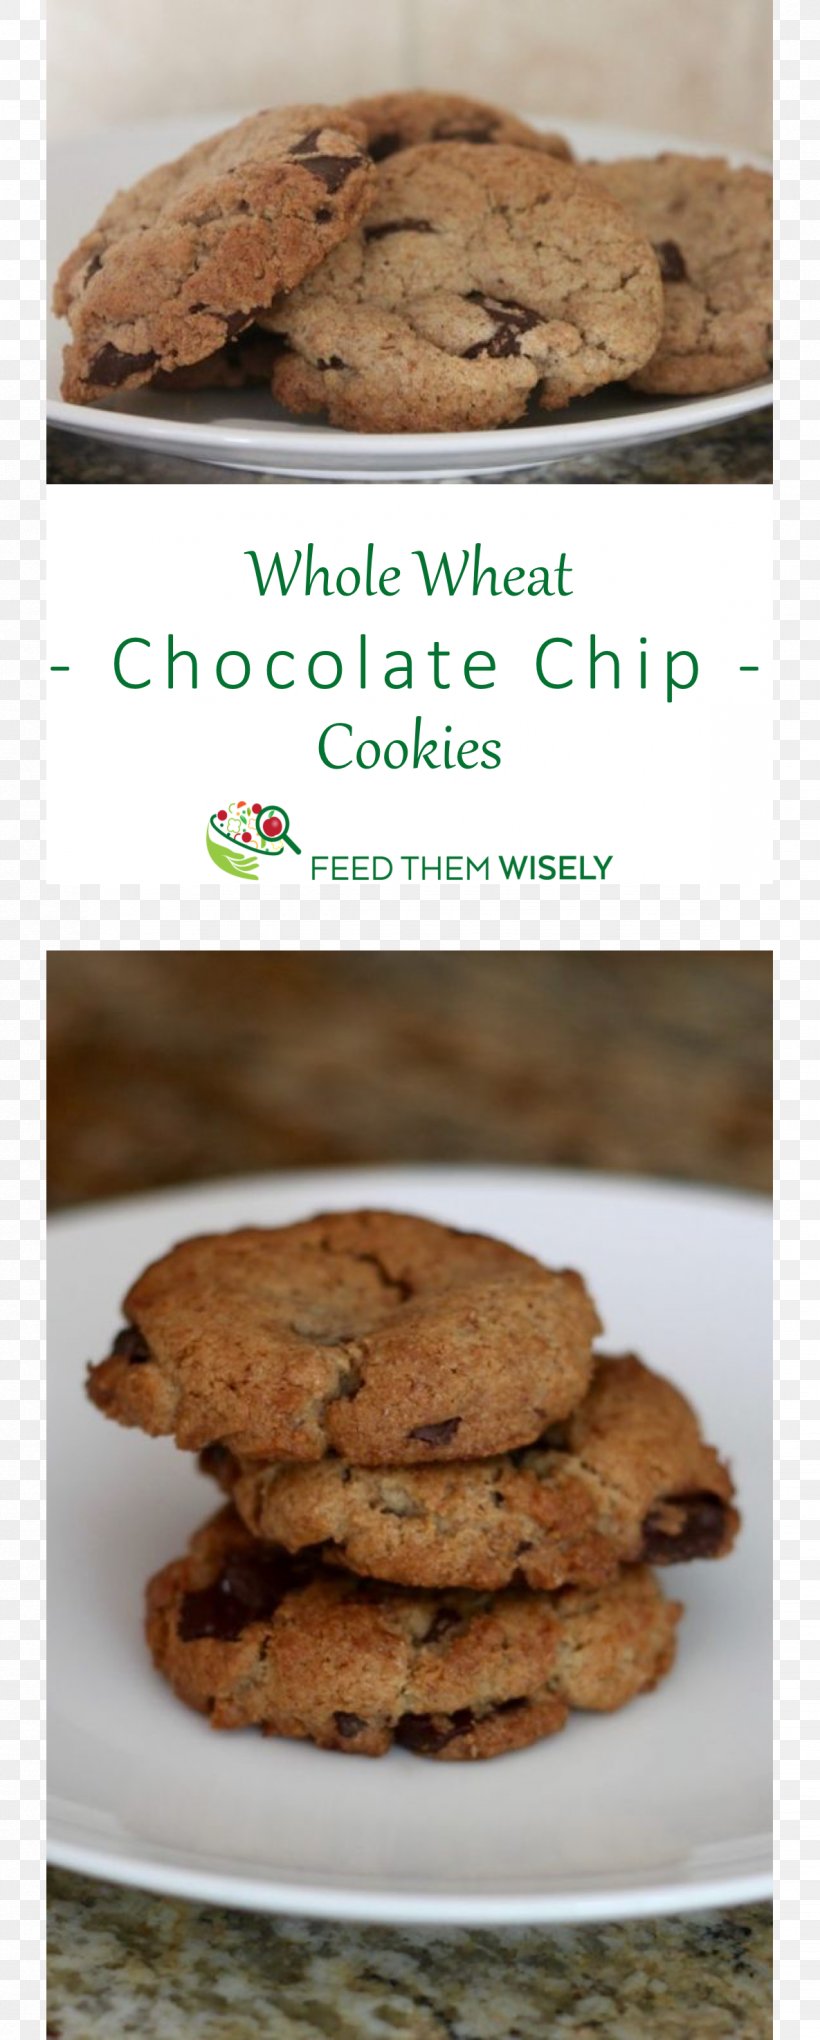 Chocolate Chip Cookie Peanut Butter Cookie Oatmeal Raisin Cookies Biscuits, PNG, 1185x2949px, Chocolate Chip Cookie, Baked Goods, Baking, Biscuit, Biscuits Download Free